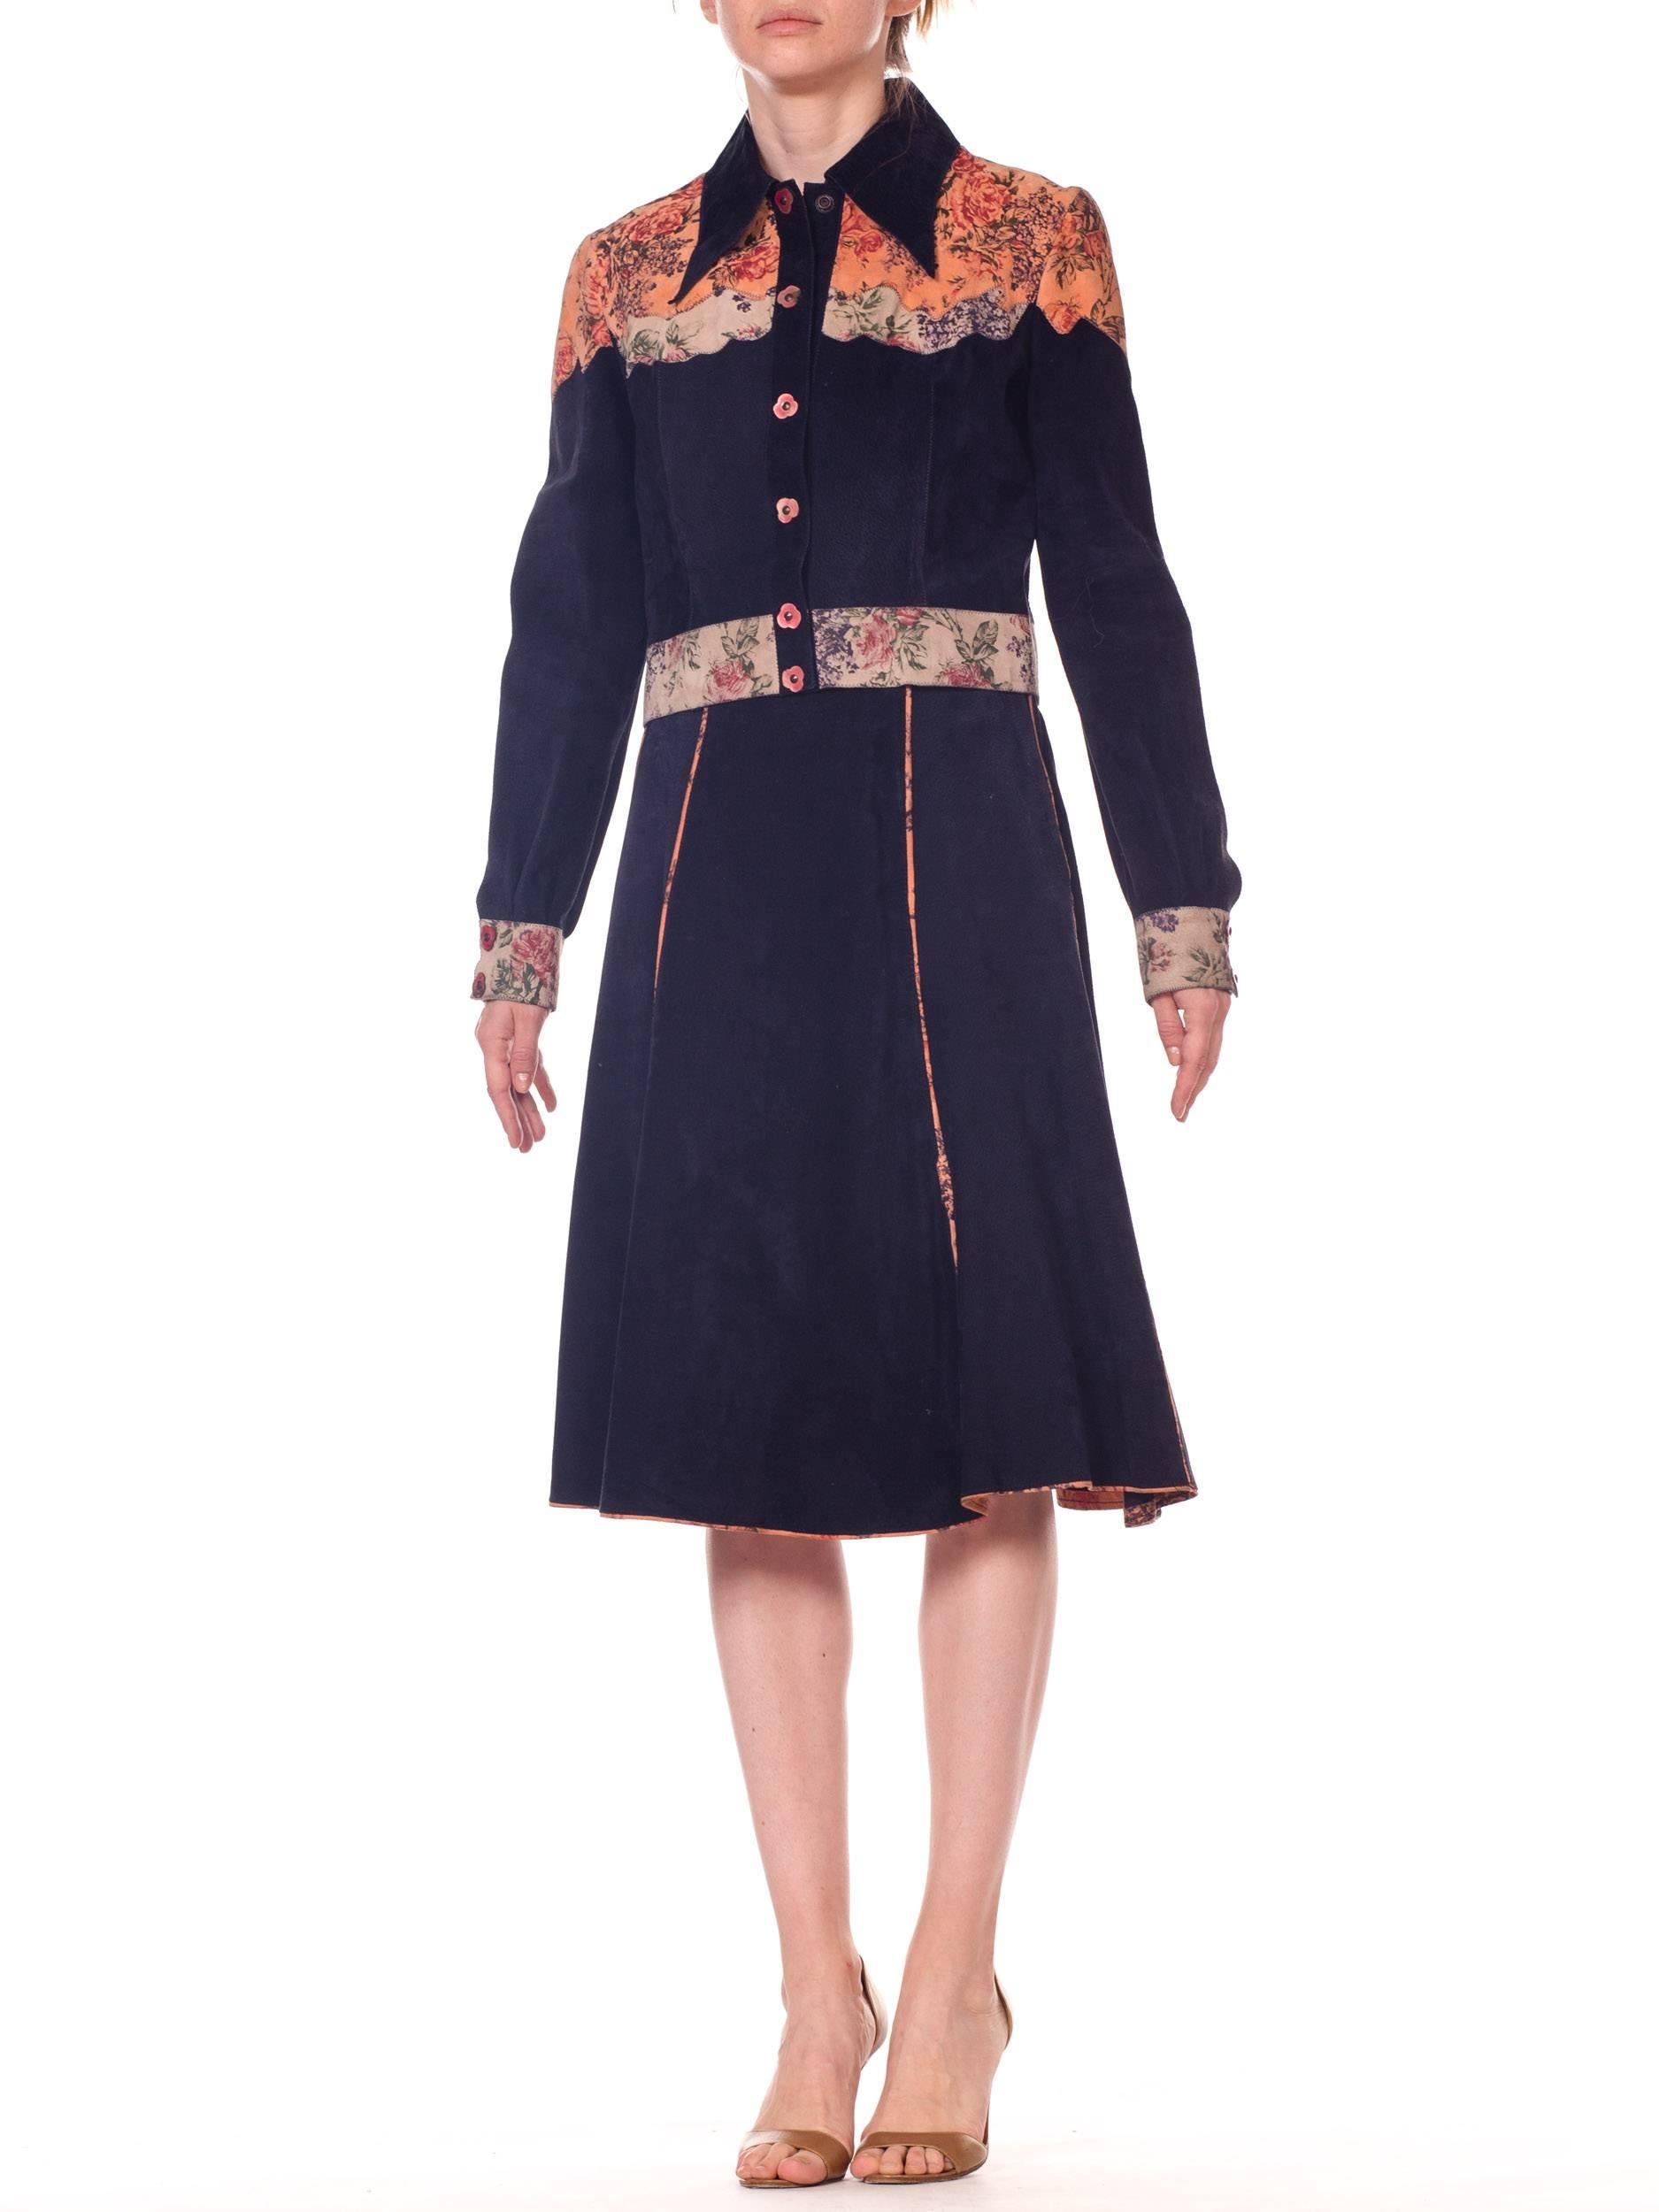 Roberto Cavalli Navy Patterned Suede Panel Cropped Jacket and skirt set.
Hand Painted 1970